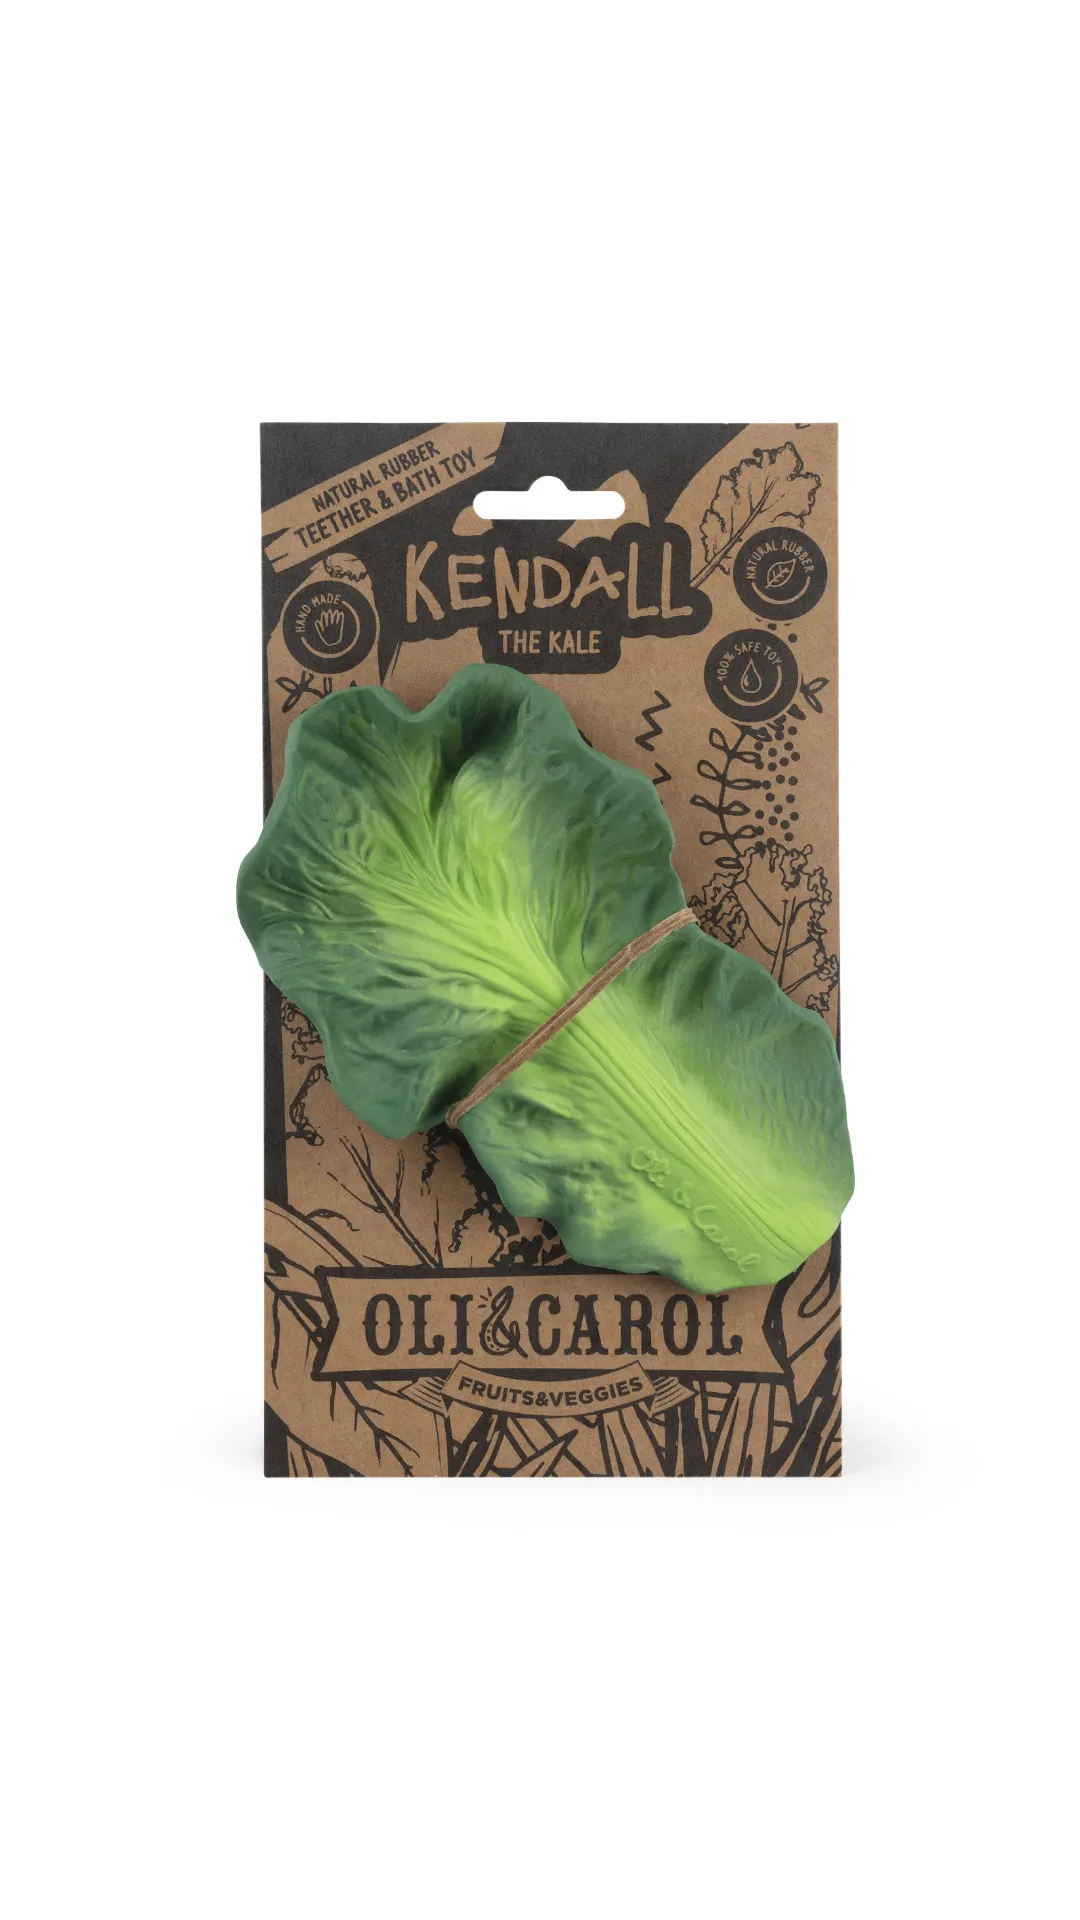 Kendall the Kale